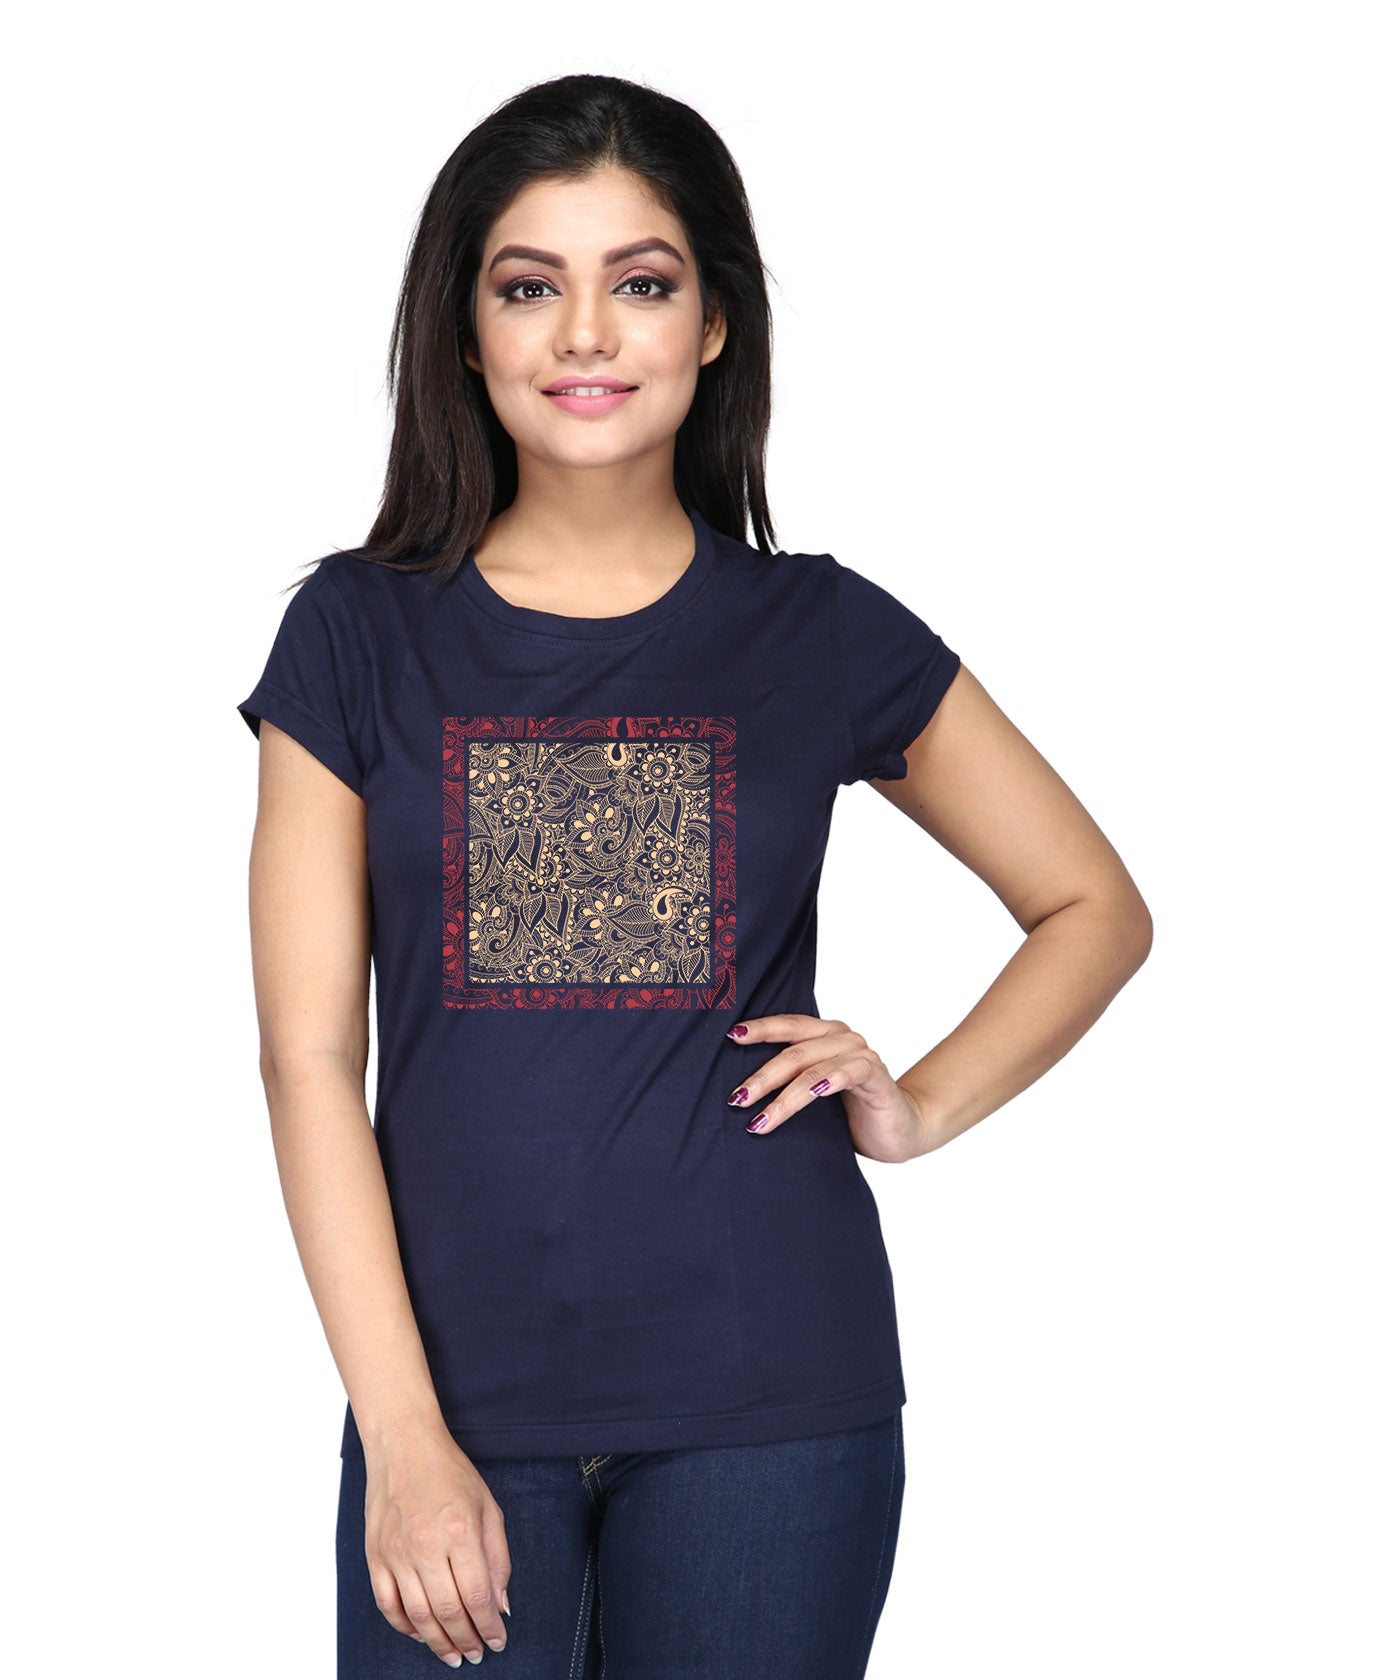 Flowers And Leaves Art - Premium Round Neck Cotton Tees for Women - Navy Blue